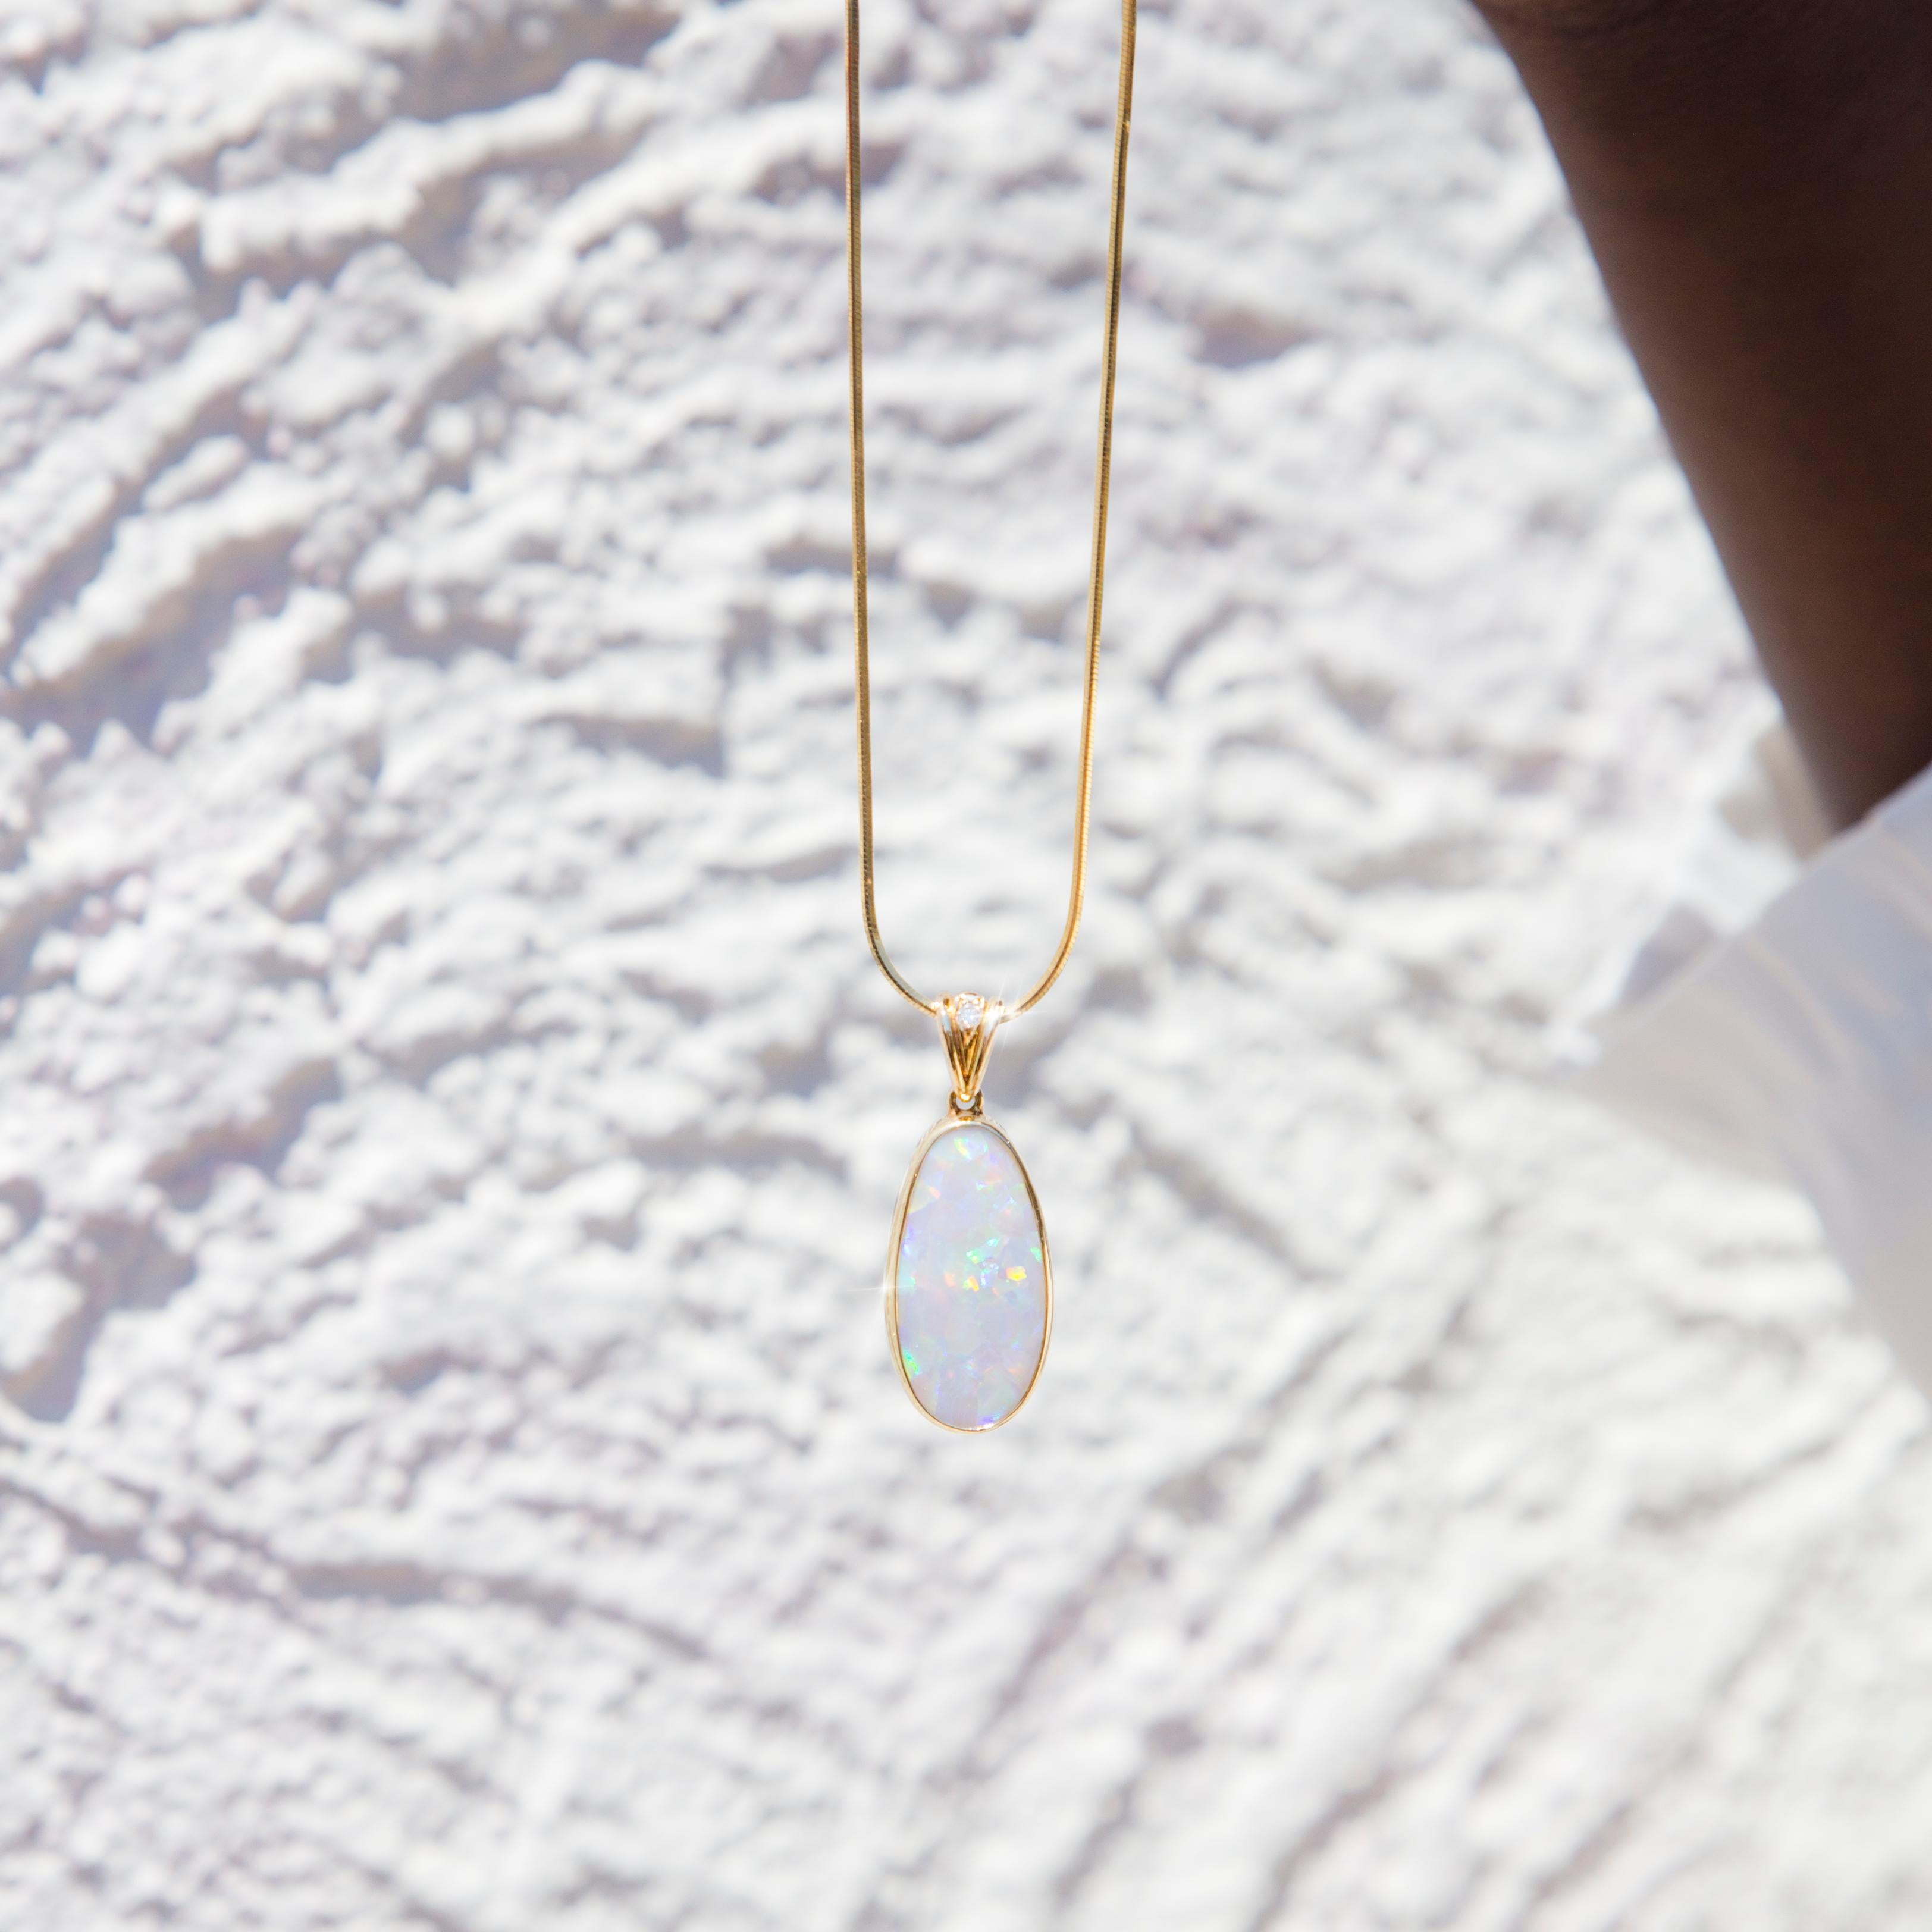 Artfully crafted in 18 carat yellow gold, this enchanting vintage pendant features an alluring solid freeform oval Australian opal carefully set in a minimalist bezel setting. We have named this gorgeous piece The Fleur Pendant. The Fleur Pendant